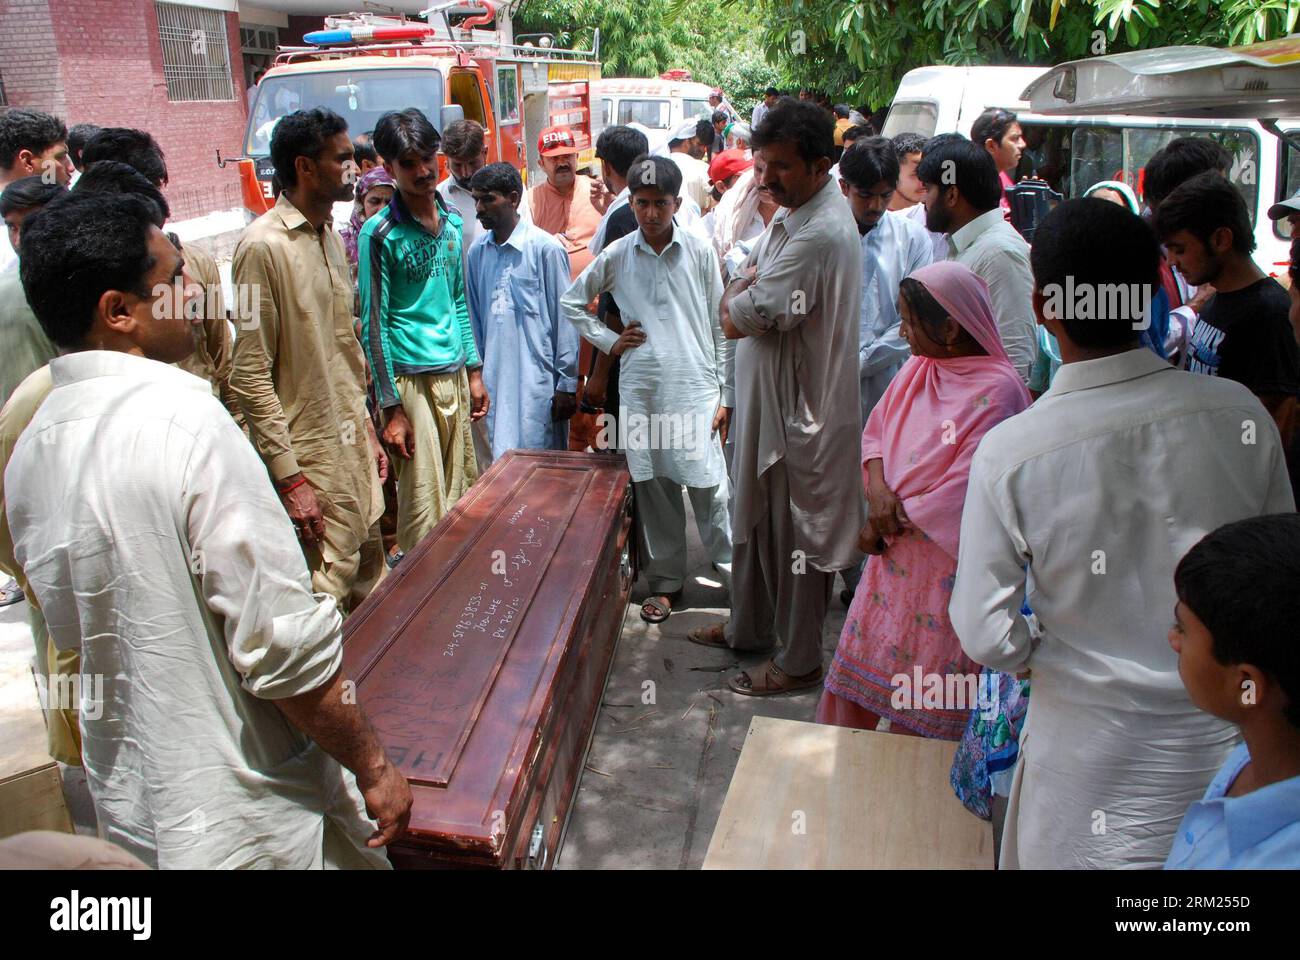 Bildnummer: 59700008  Datum: 25.05.2013  Copyright: imago/Xinhua (130525) -- GUJRAT (PAKISTAN), May 25, 2013 (Xinhua) -- gather around coffins of children who were killed in a school van gas cylinder blast on the outskirts of Gujrat, a district in Pakistan s eastern province of Punjab, on May 25, 2013. At least 15 children were killed in the school van gas cylinder blast that took place early Saturday morning in Gujrat, reported local media Dunya. (Xinhua/Stringer) (lr) PAKISTAN-GUJRAT-SCHOOL VAN GAS CYLINDER BLAST PUBLICATIONxNOTxINxCHN Gesellschaft Gasexplosion Schule Kind Opfer Trauer Traue Stock Photo